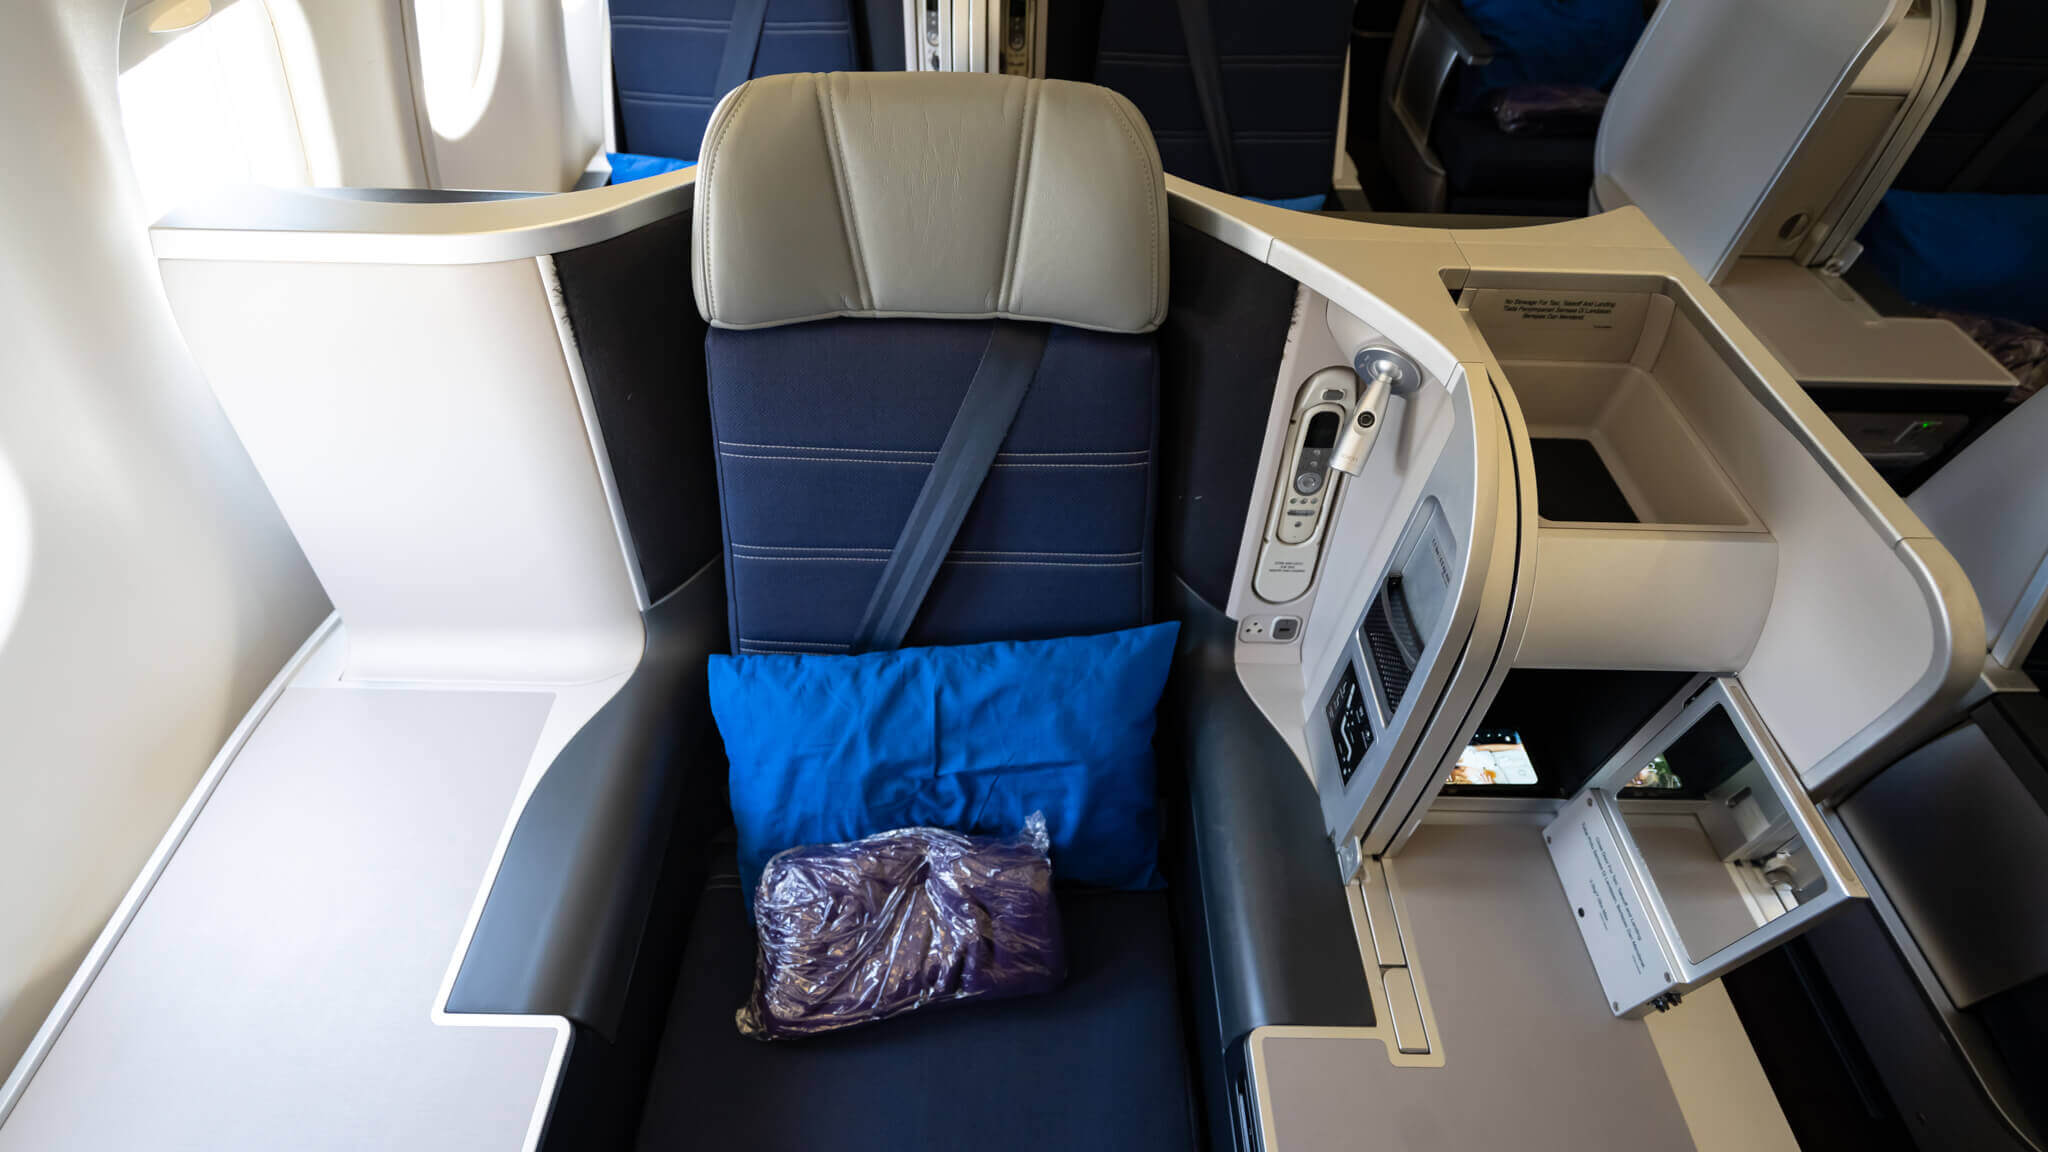 a seat with a pillow and a blue pillow on the back of a plane